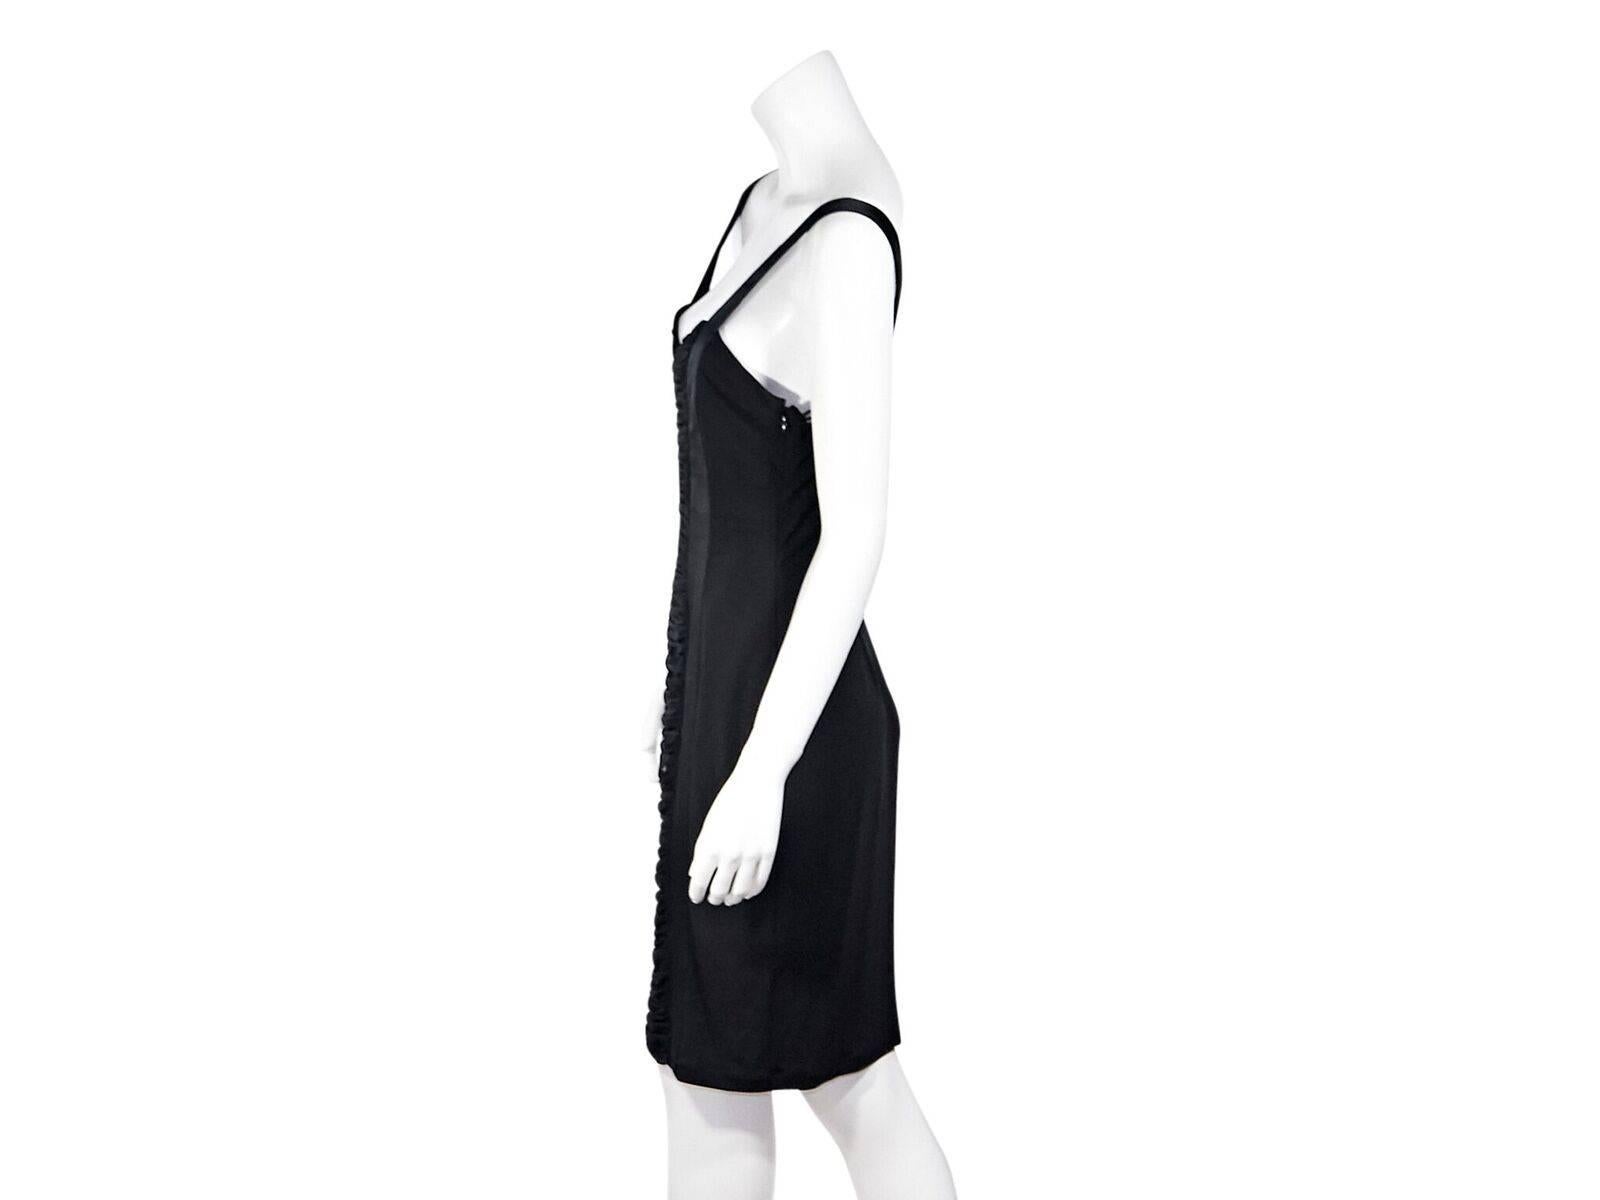 Product details:  Black jersey knit sheath dress by Blumarine.  Sleeveless.  Ruched front panel.  Concealed side zip closure.  Label size IT 44.  38